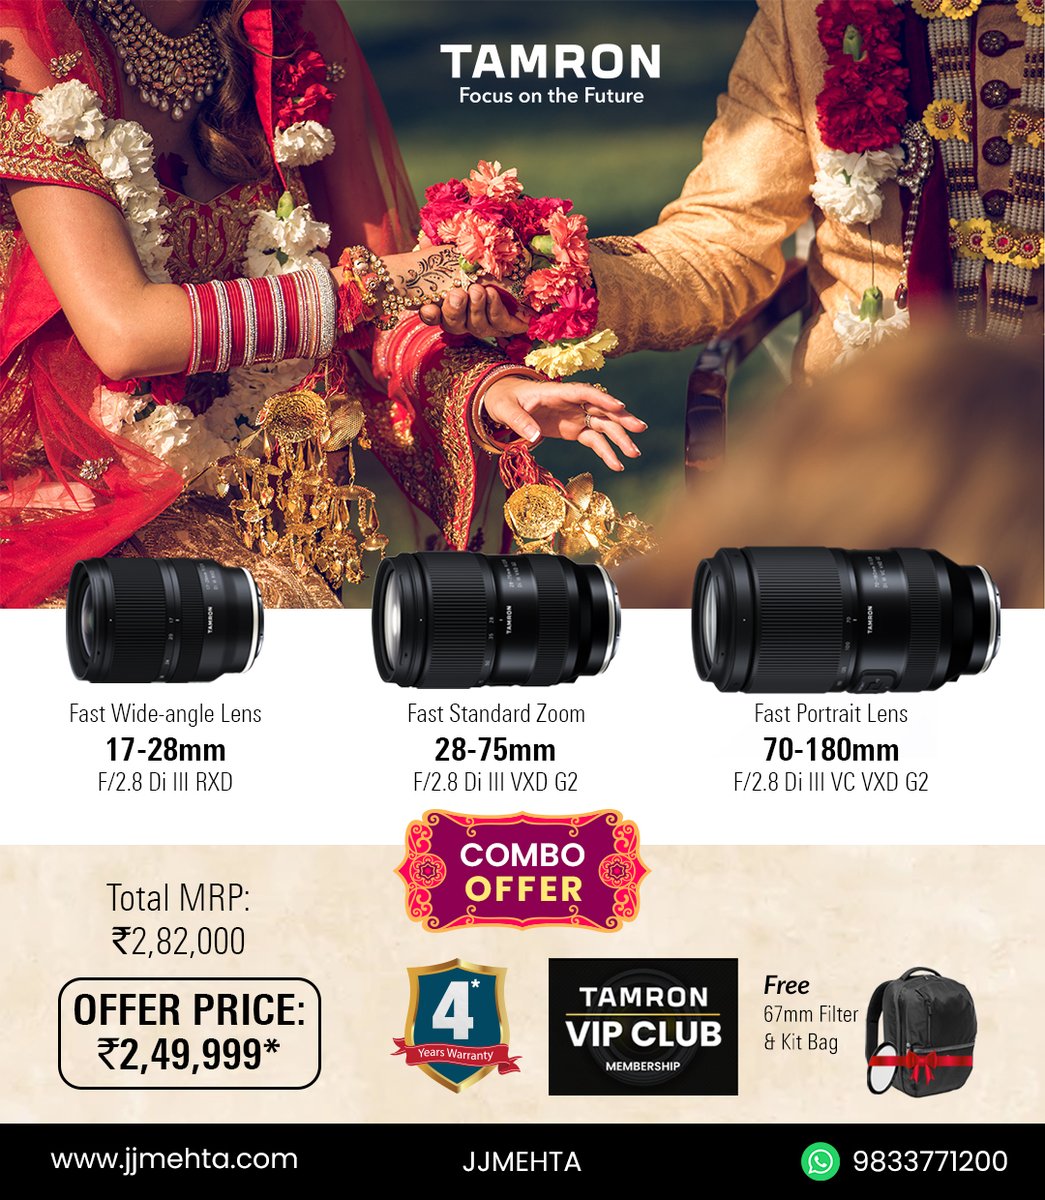 Experience the Power of TAMRON’s Trinity this Wedding Season.
- Fast-Aperture
- Fast, silent & Precise AF
- Compact design

jjmehta.com/shop/tamron_tr…

#TamronIndia #jjmehta #Tamron1728 #Tamron2875 #Tamron70180 #weddingphotography #weddingphotographer #sonywedding #sonyilce